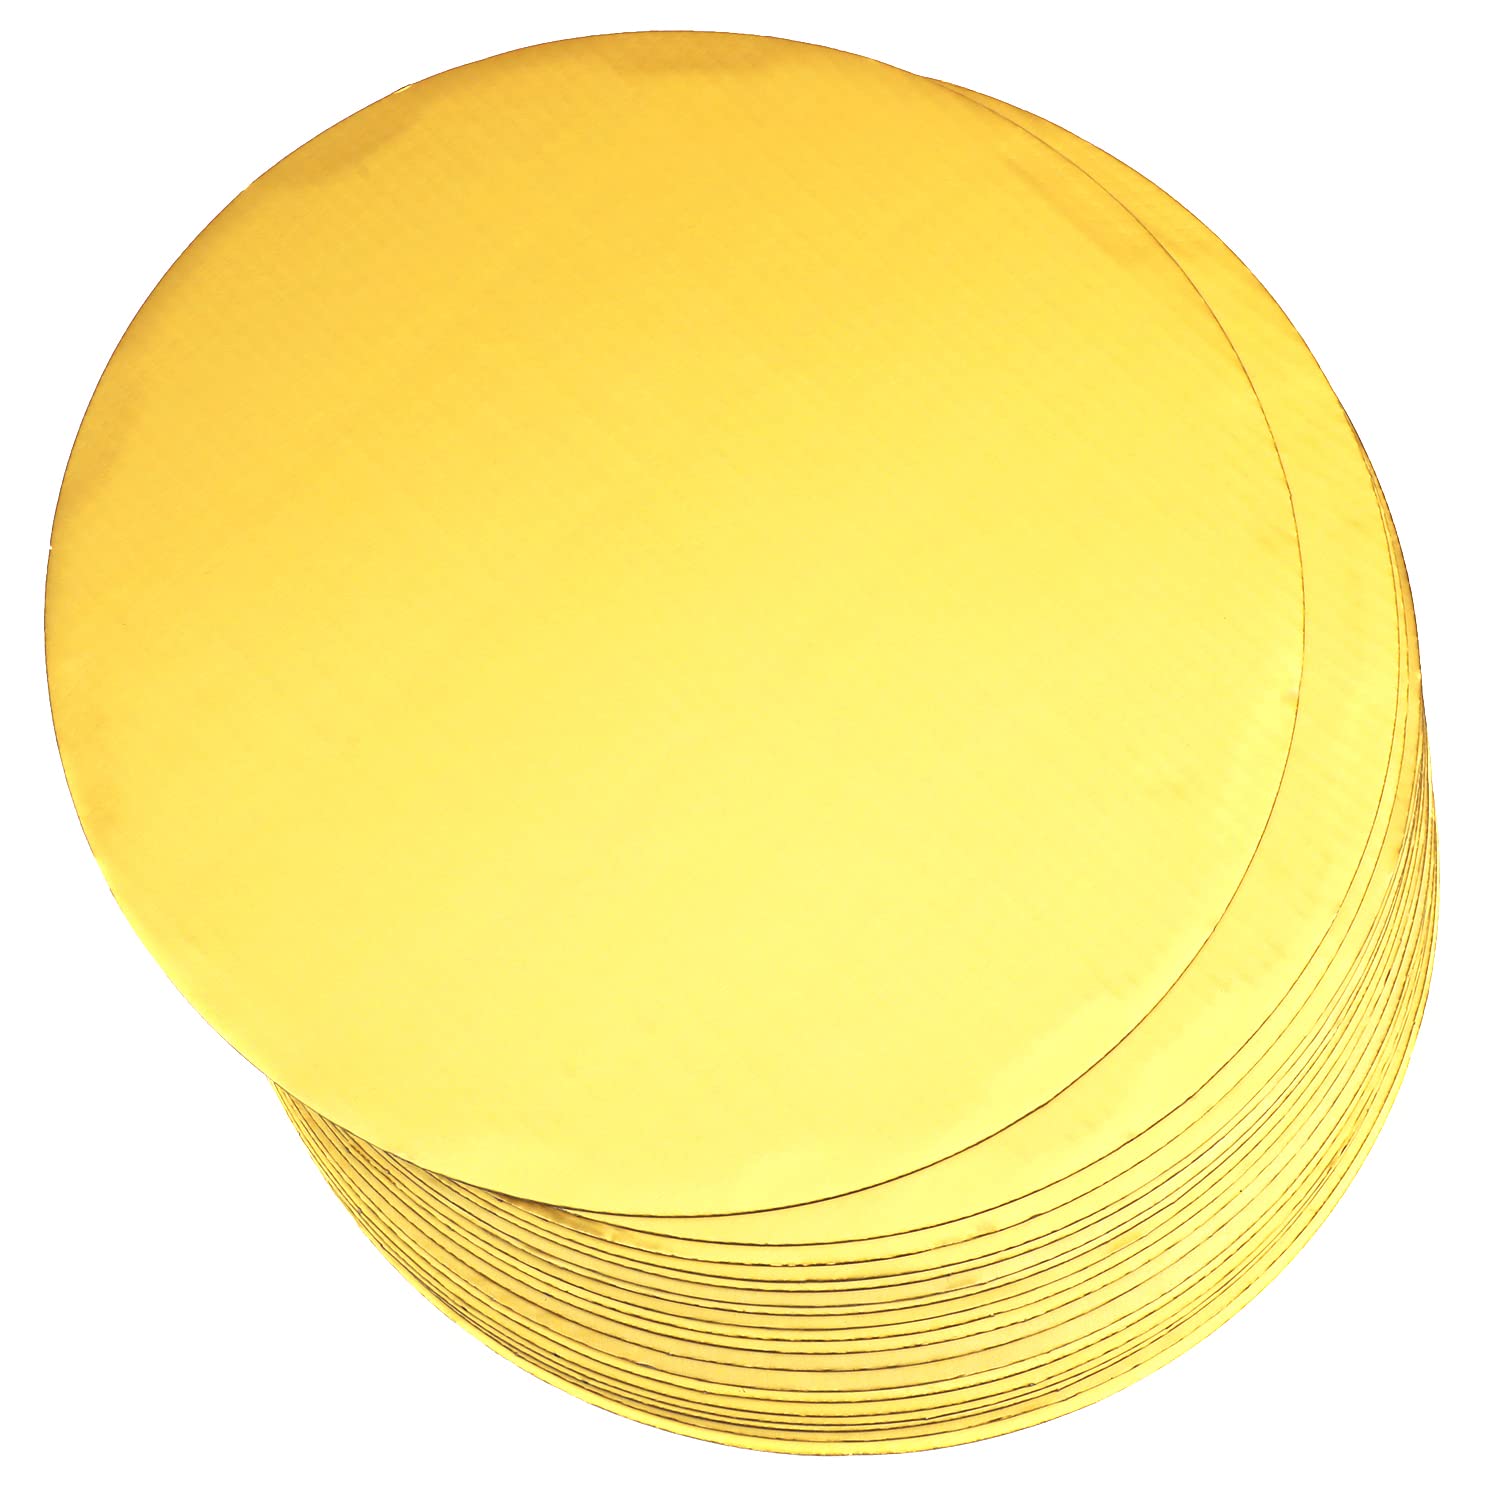 qiqee 6 Inch Gold Cake Boards Round 40-Packs Circles Rounds Base Food-Grade Cardboard Cake Plate(Thinner But Stronger)